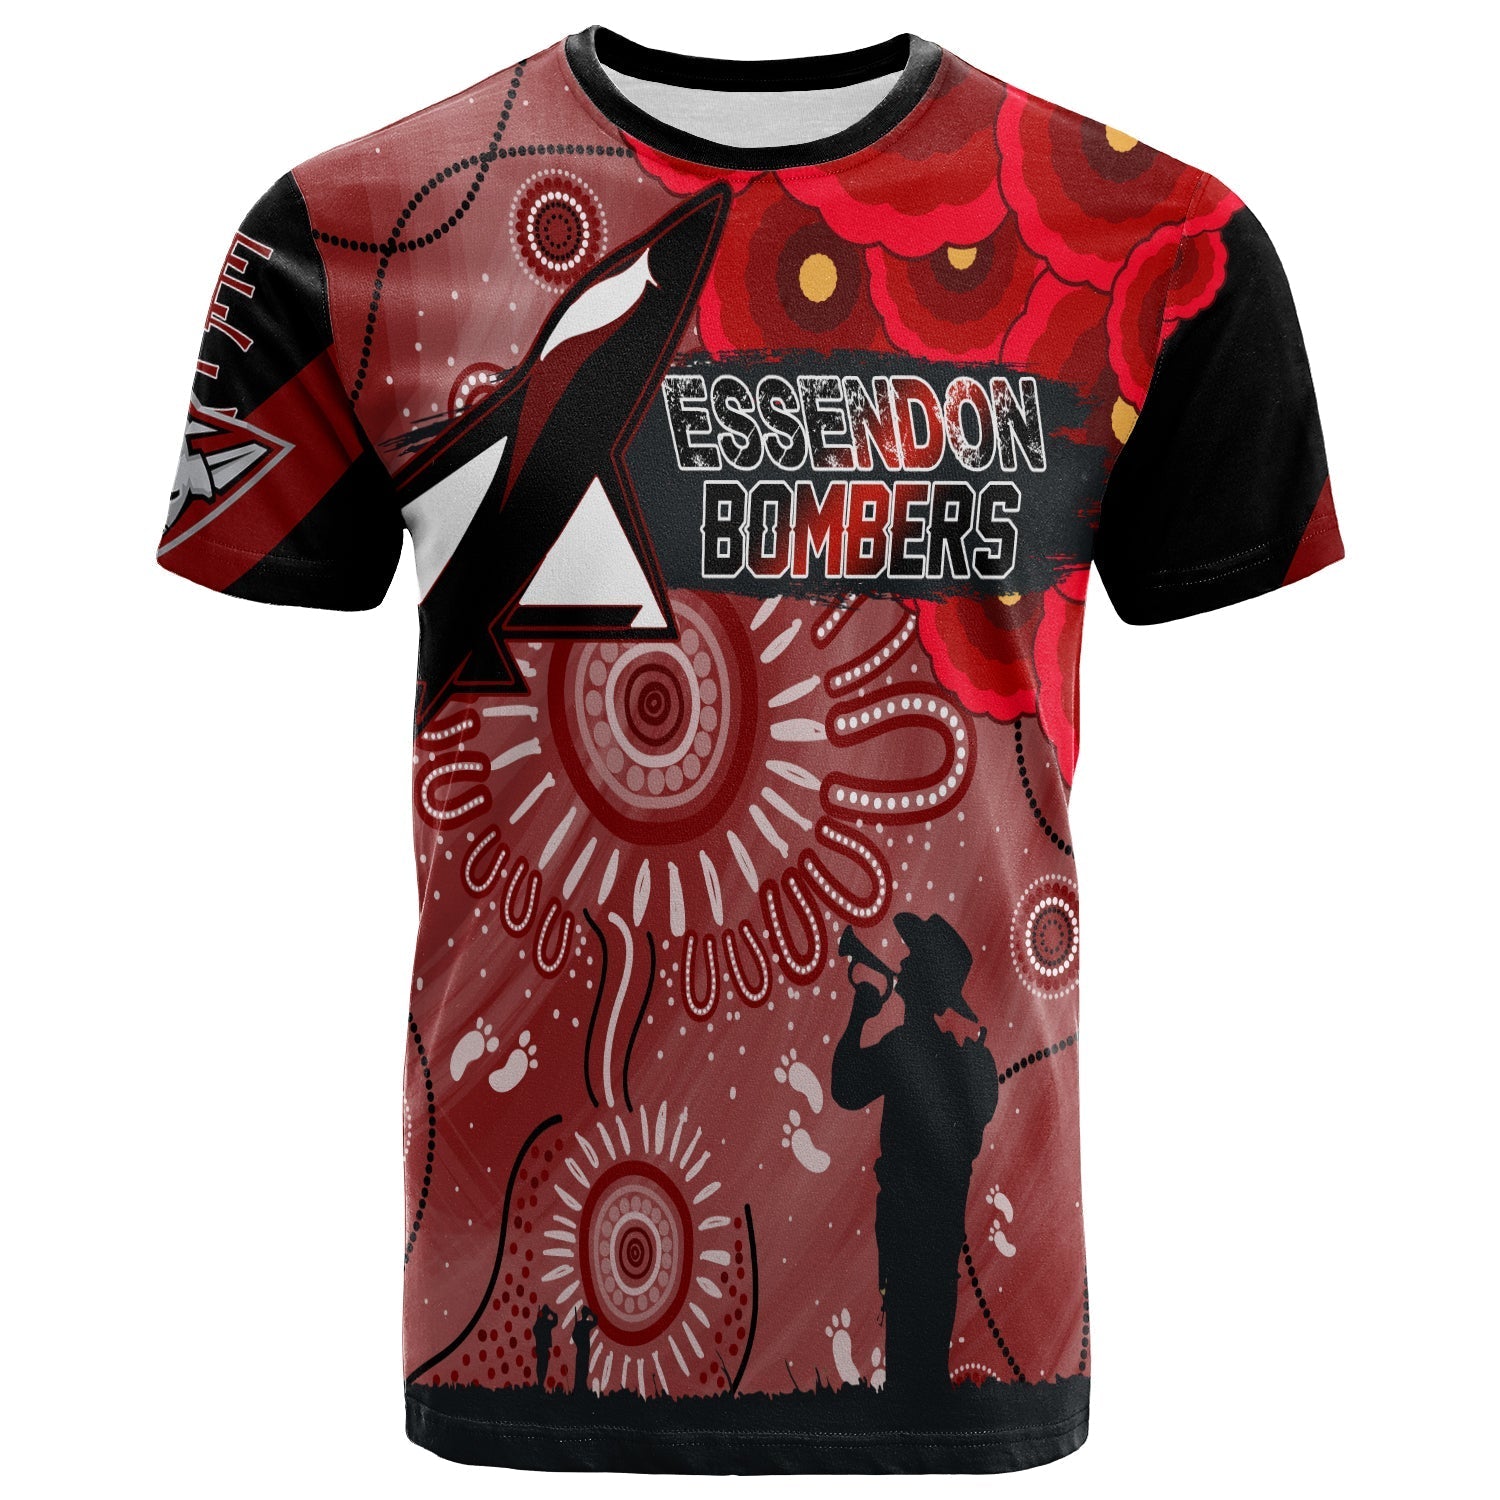 custom-personalised-essendon-bombers-indigenous-anzac-day-t-shirt-we-will-remember-lt7